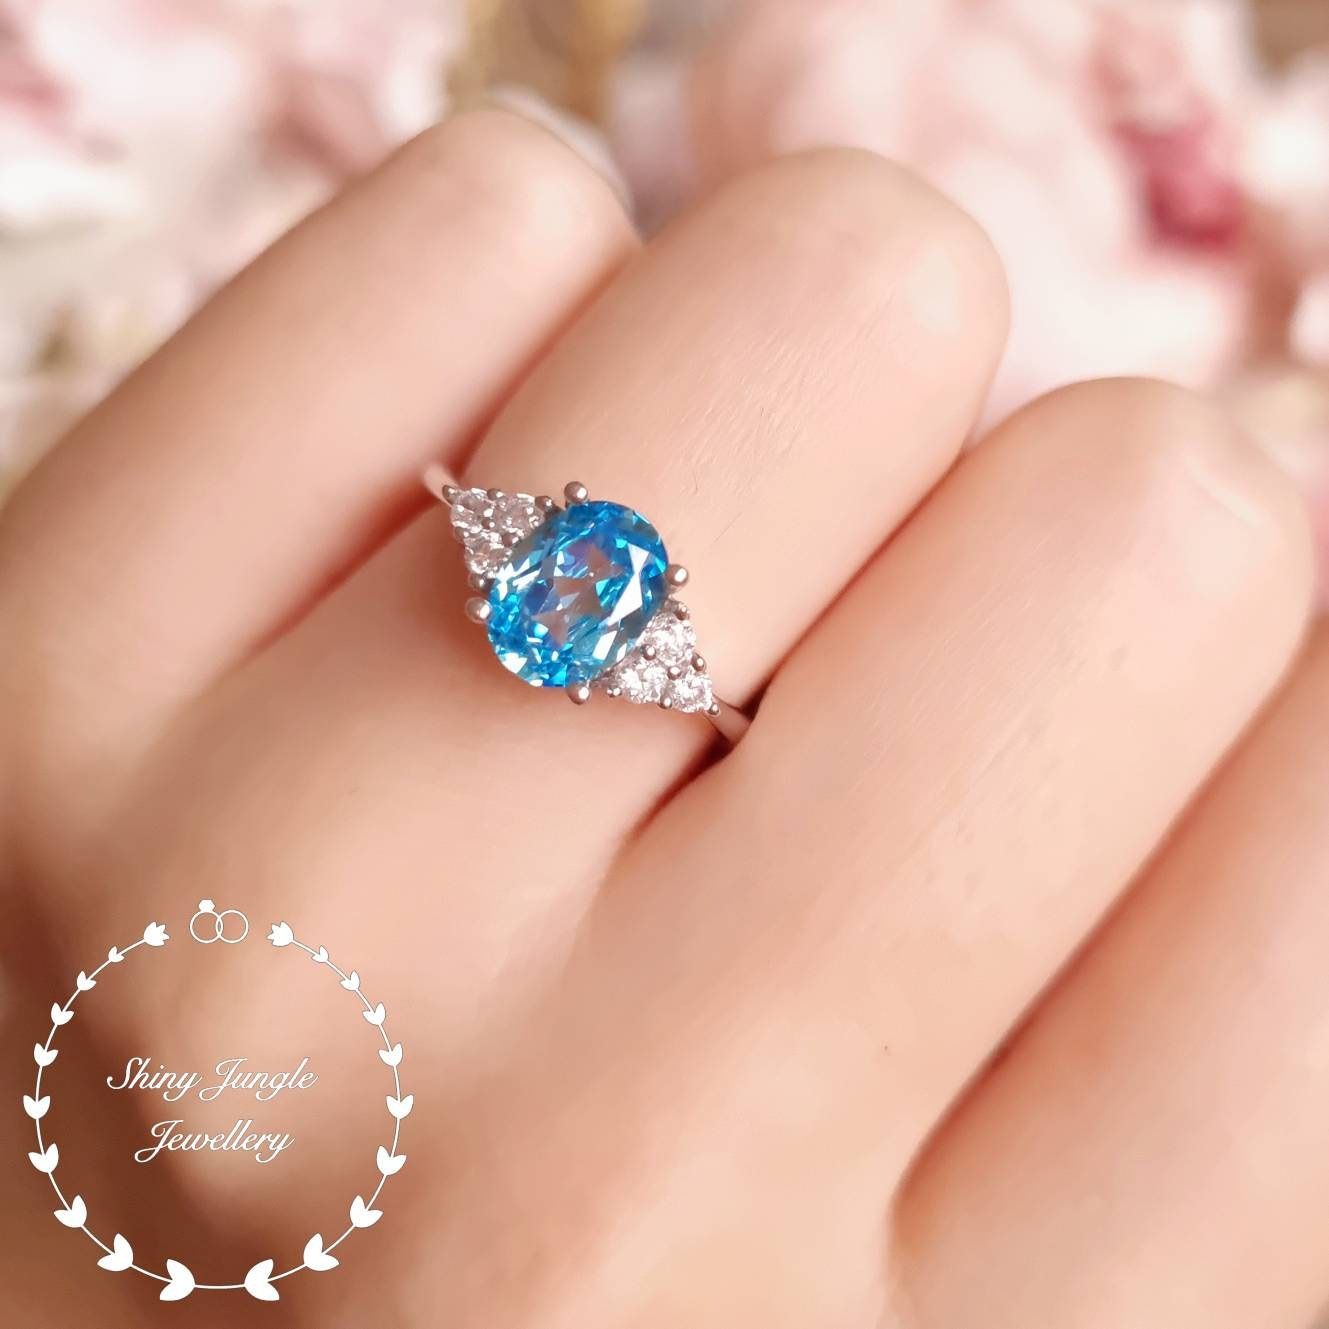 Oval Three Stone Swiss Blue Topaz Ring, 2 Carats 6*8 Mm Swiss Blue Topaz  Engagement Ring, Electric Blue Ring, December Birthstone Gift Throughout Blue Topaz Rings (View 6 of 25)